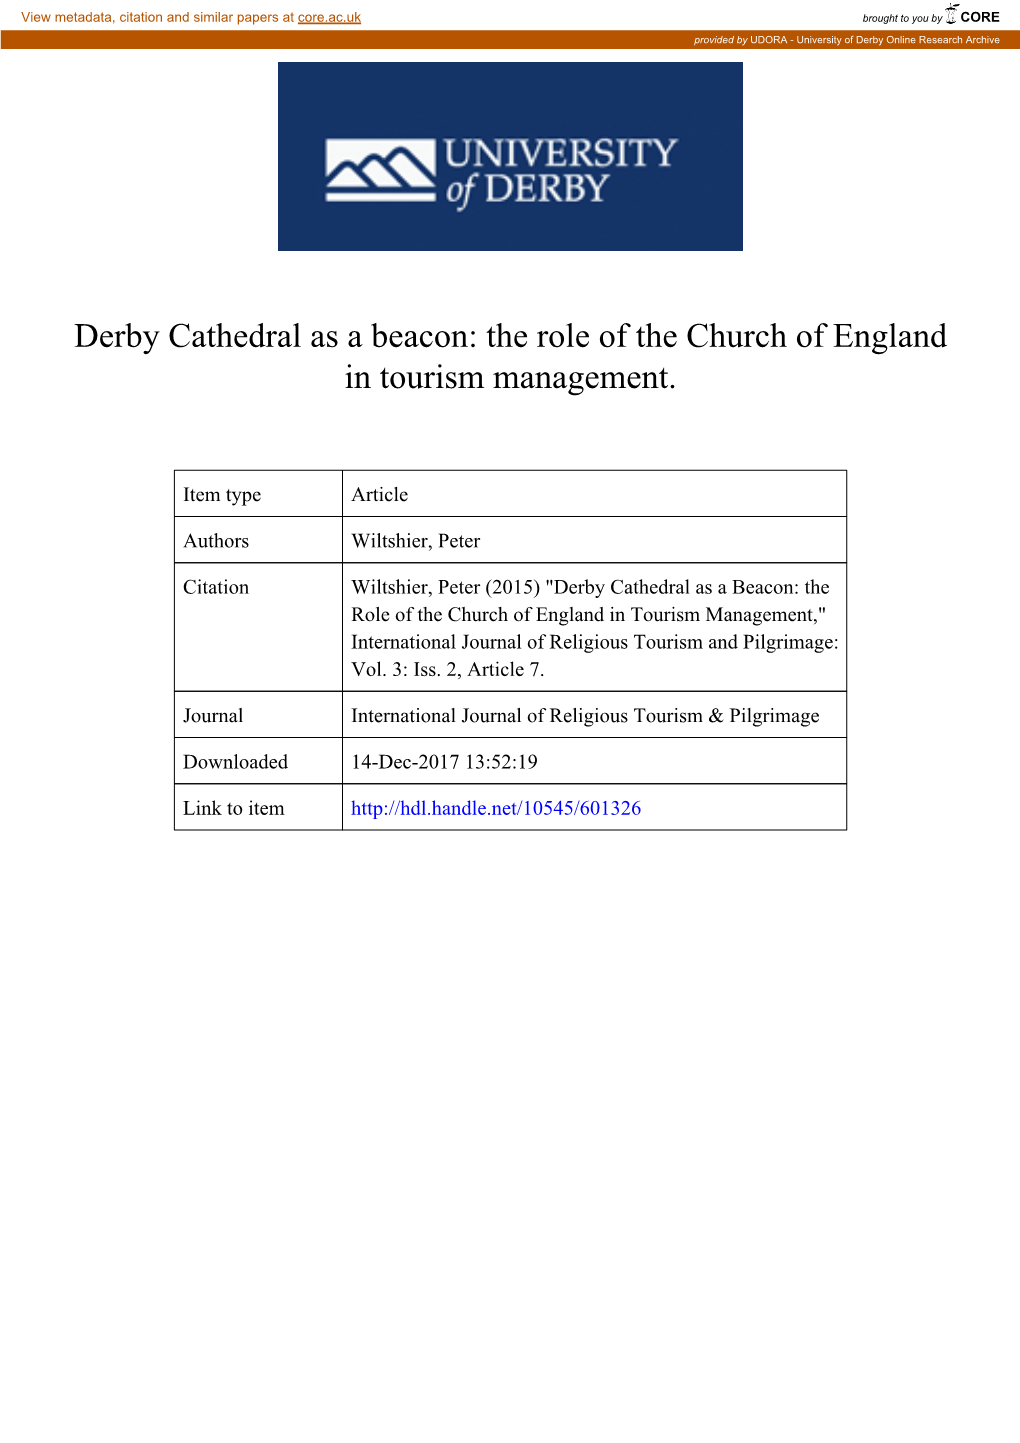 Derby Cathedral As a Beacon: the Role of the Church of England in Tourism Management